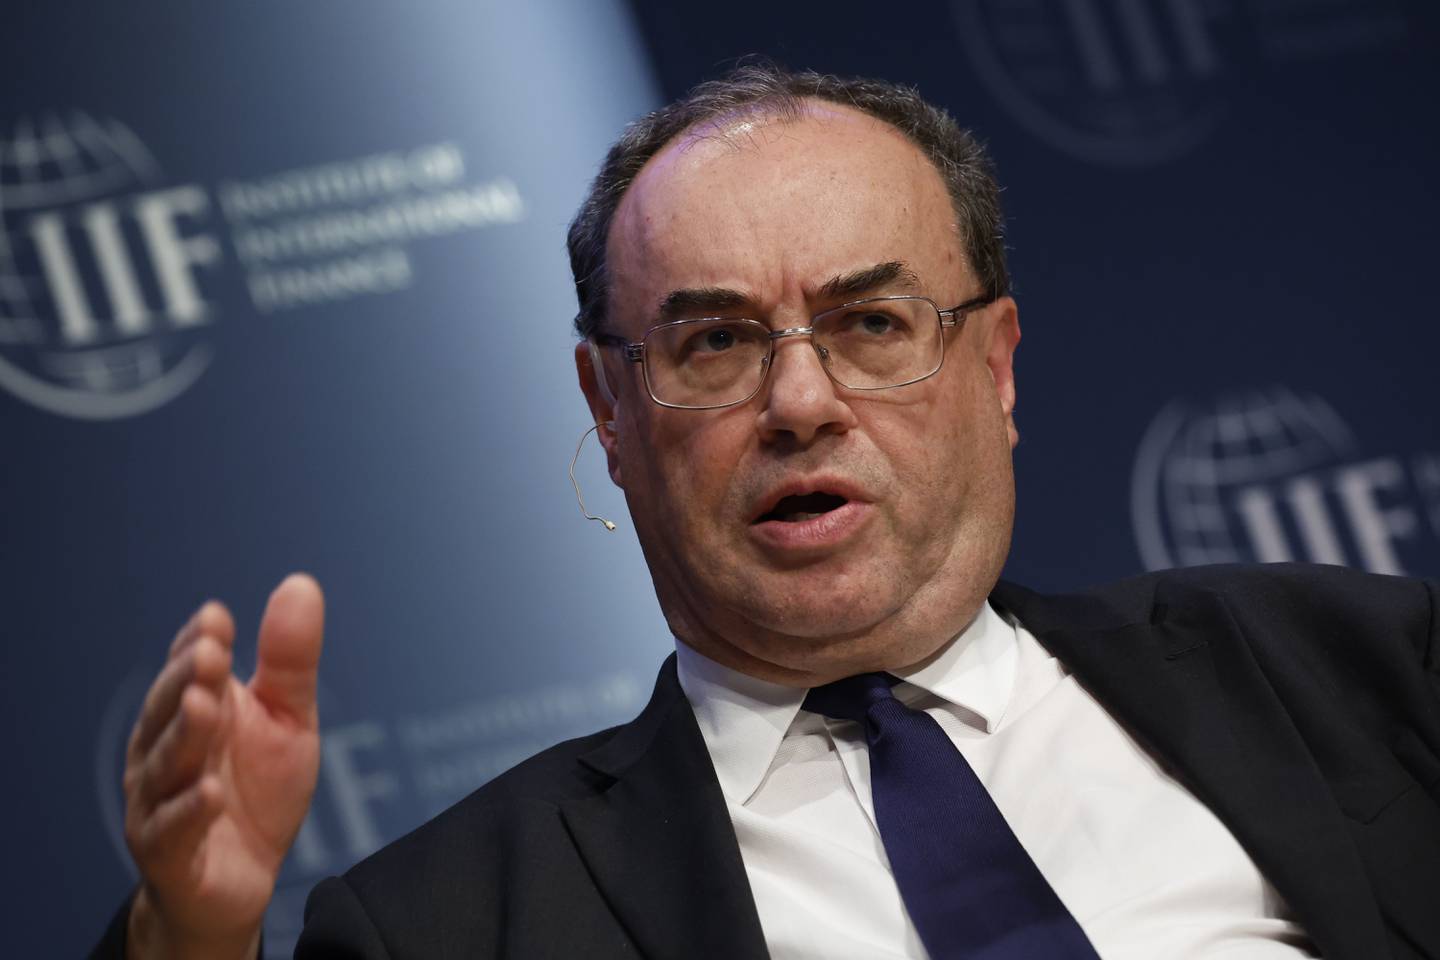 Andrew Bailey, Governor of the Bank of England, speaks during the Institute of International Finance annual membership meeting in Washington on Tuesday. Bloomberg